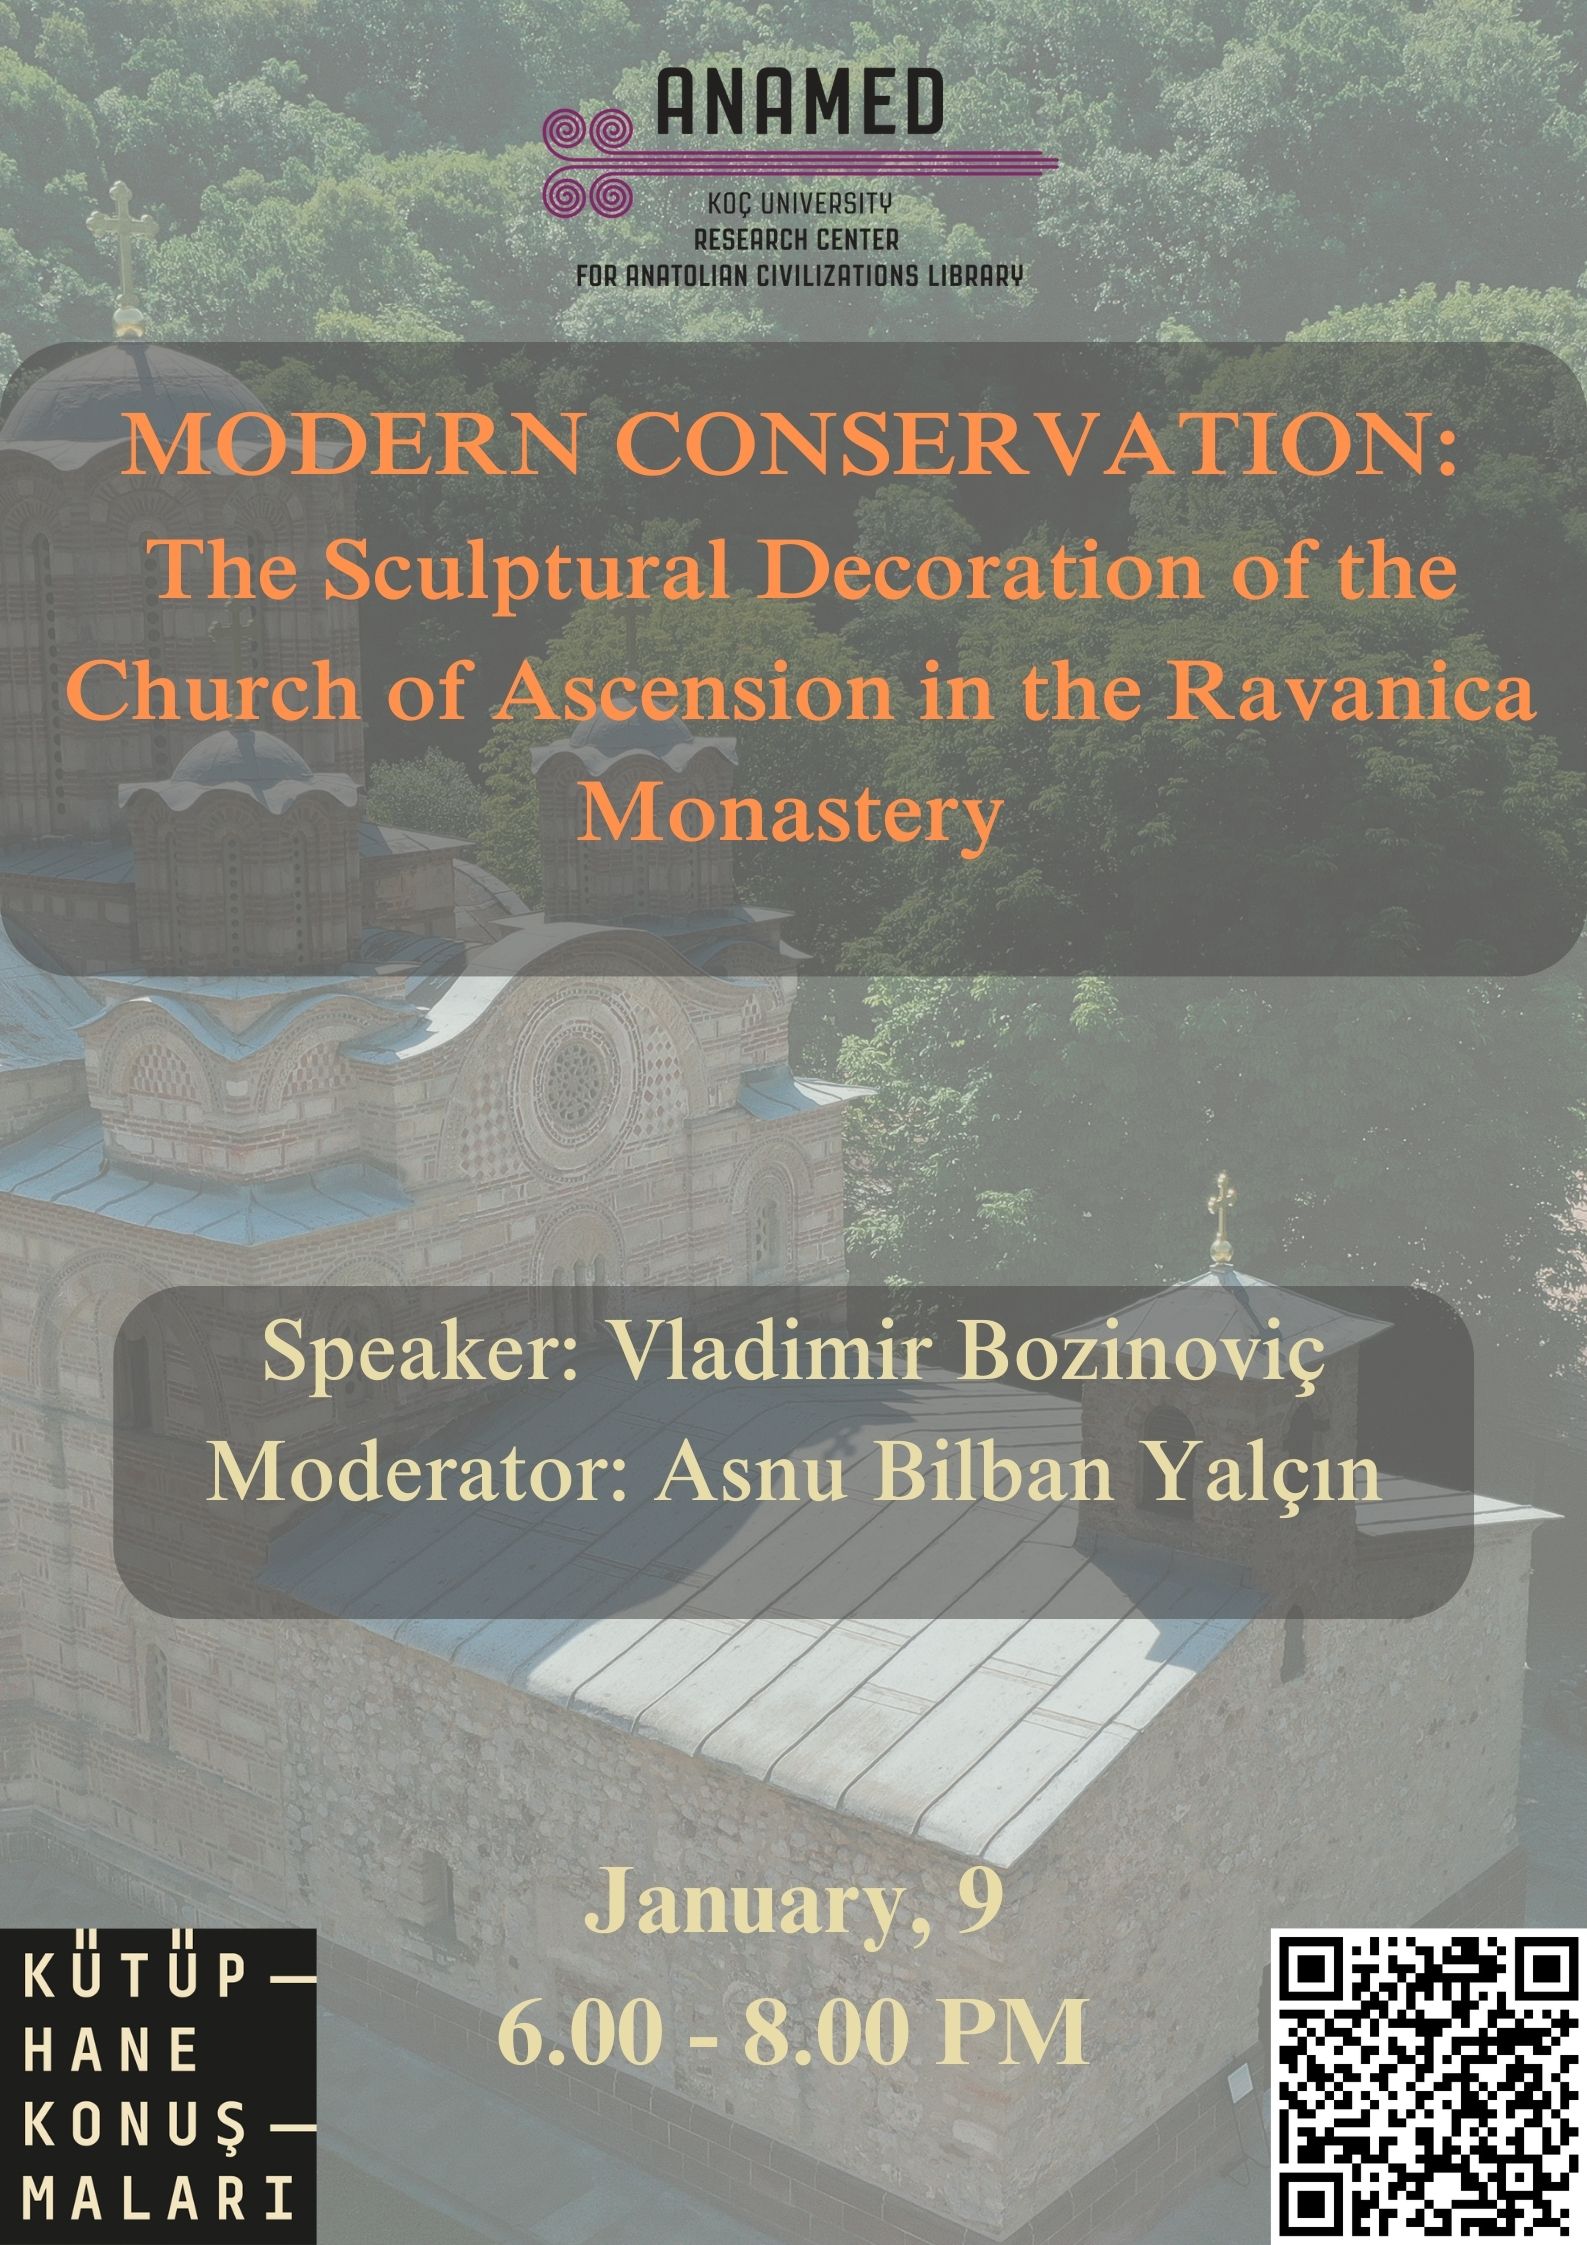 Modern Conservation: The Sculptural Decoration of the Church of Ascension in the Ravanica Monastery